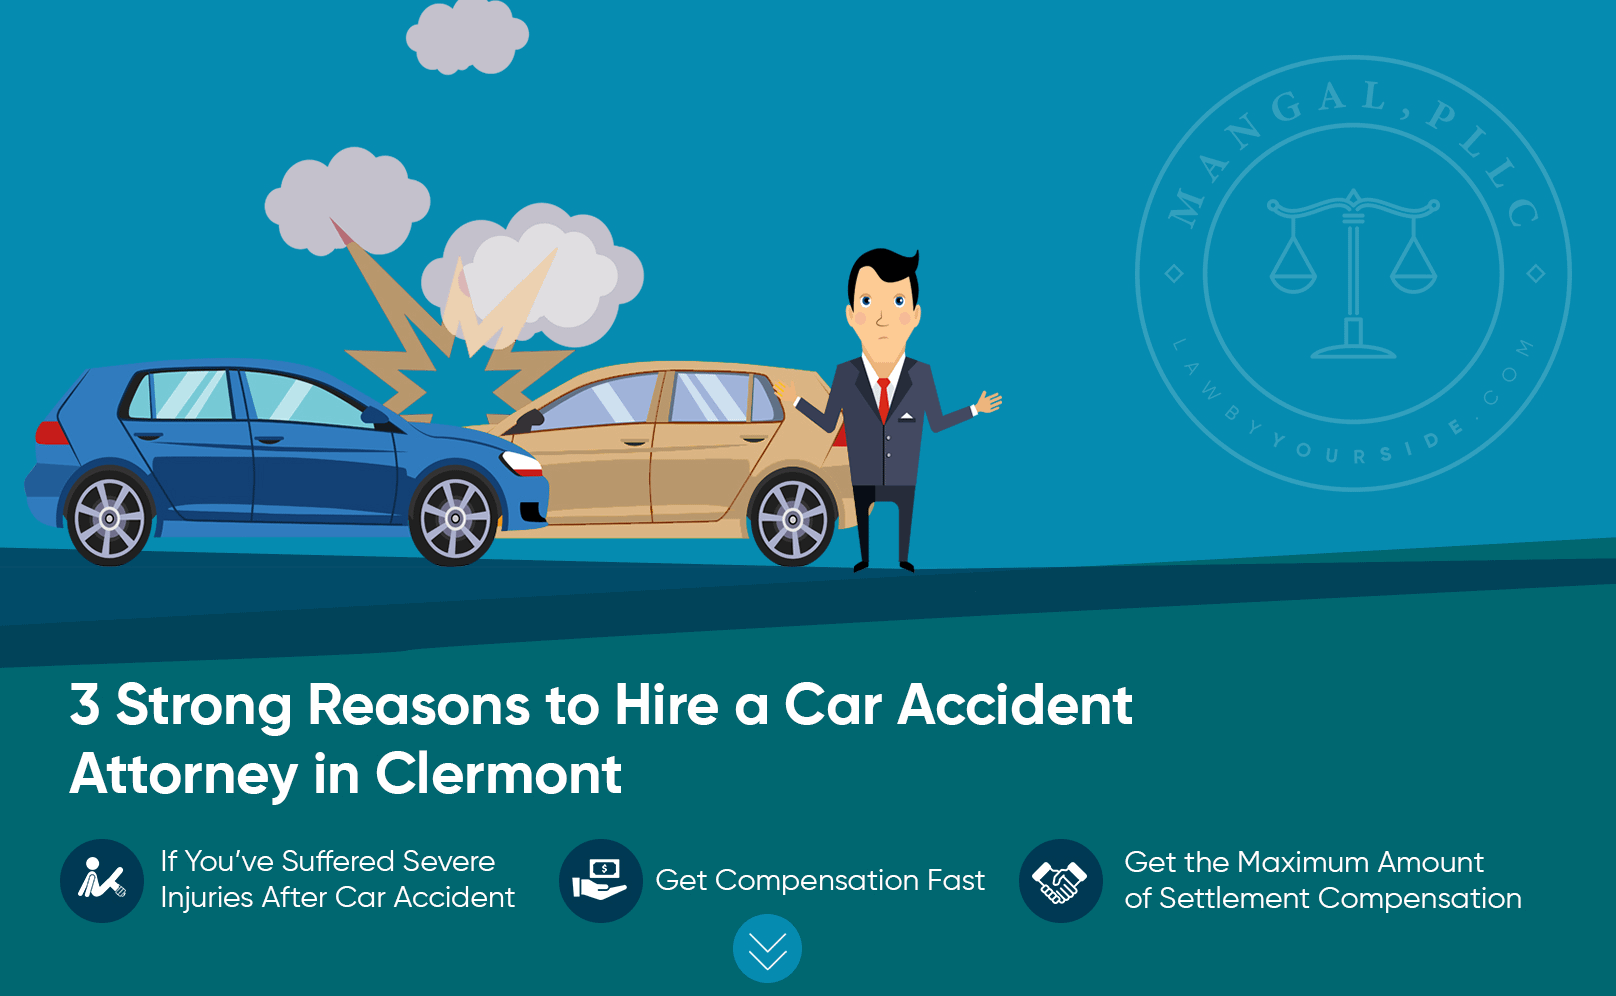 3-Strong-Reasons-to-Hire-a-Car-Accident-Attorney-in-Clermont